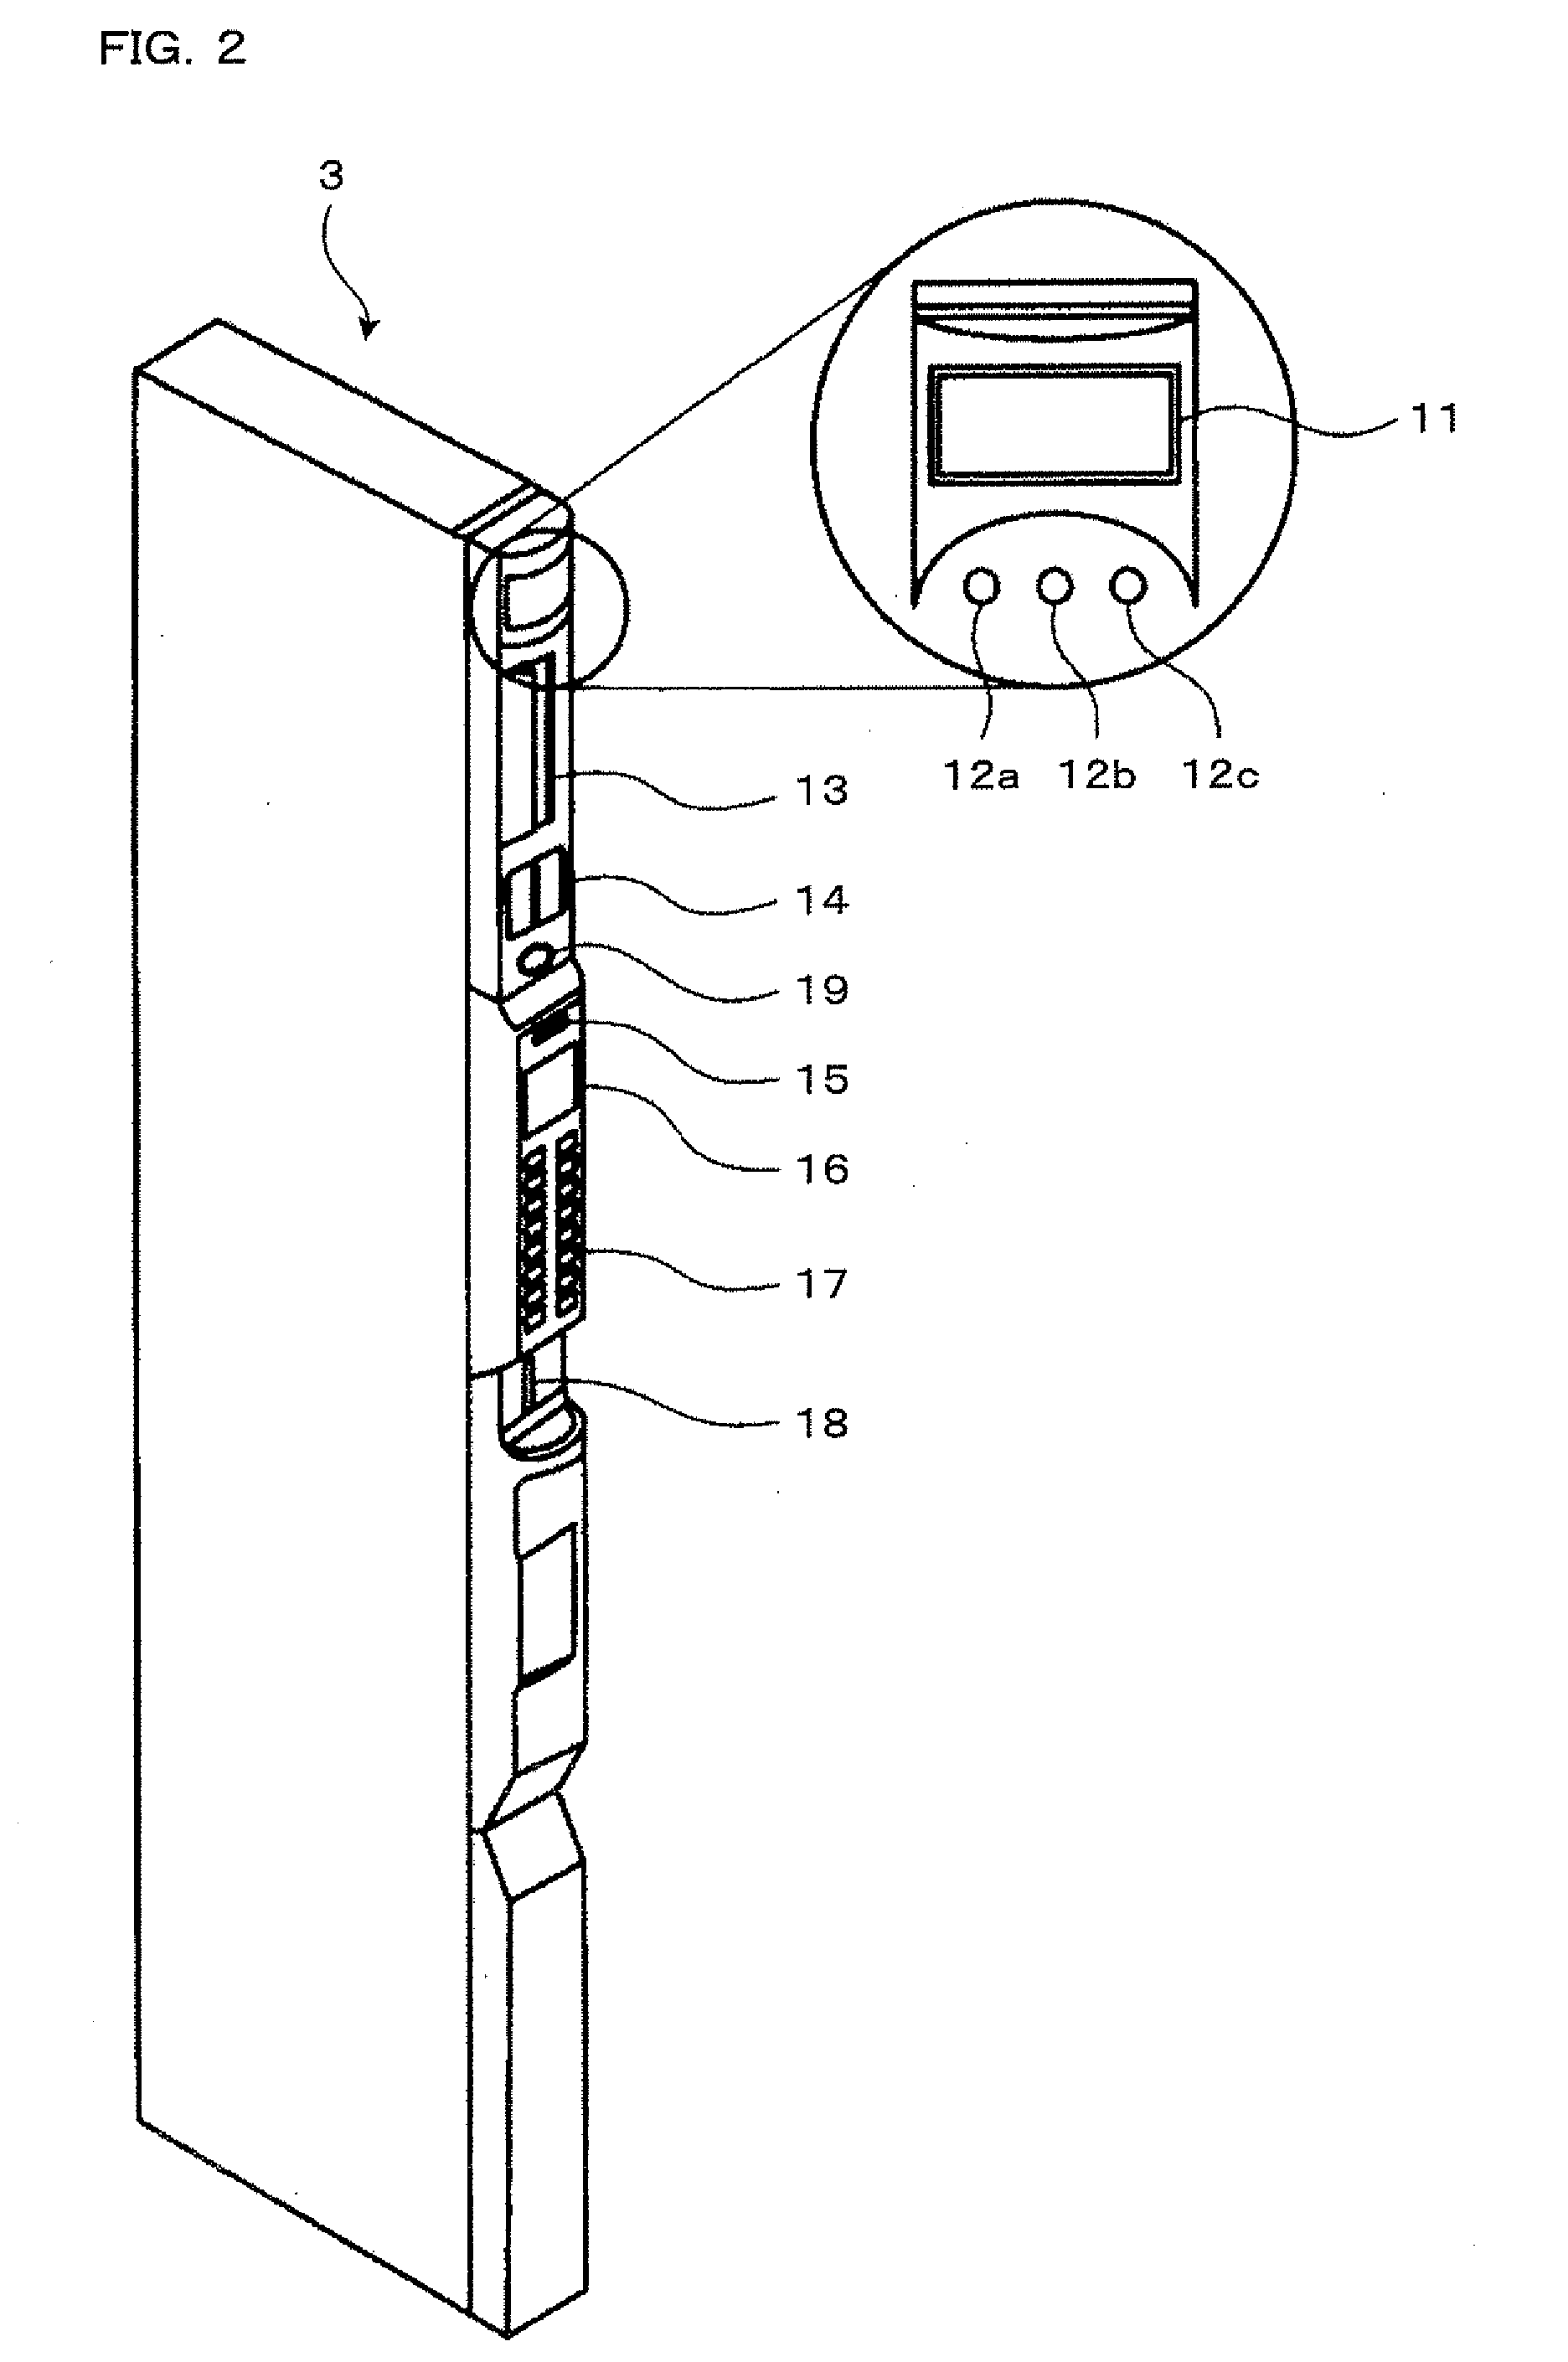 Peripheral device of gaming machine, server, and game system